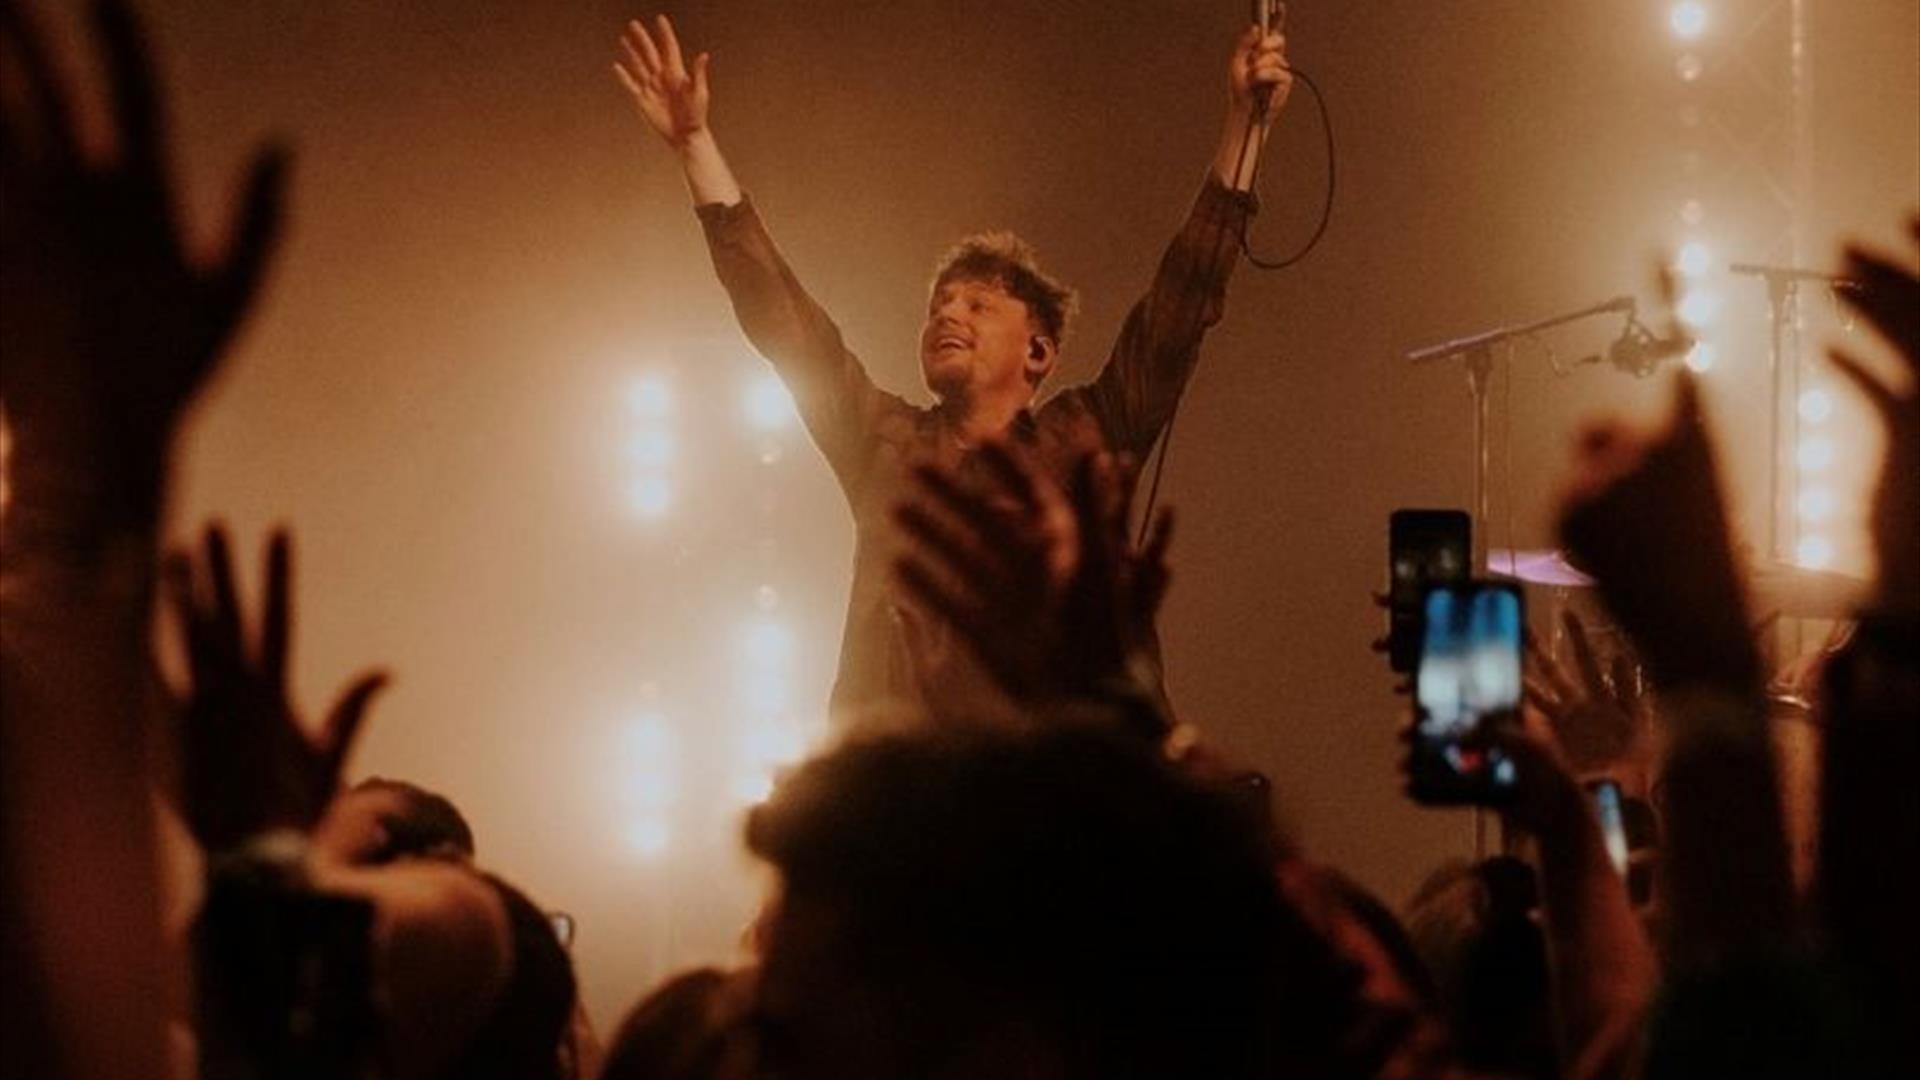 Ryan McMullan performing in front of a crowd, with his hands in the air, smiling